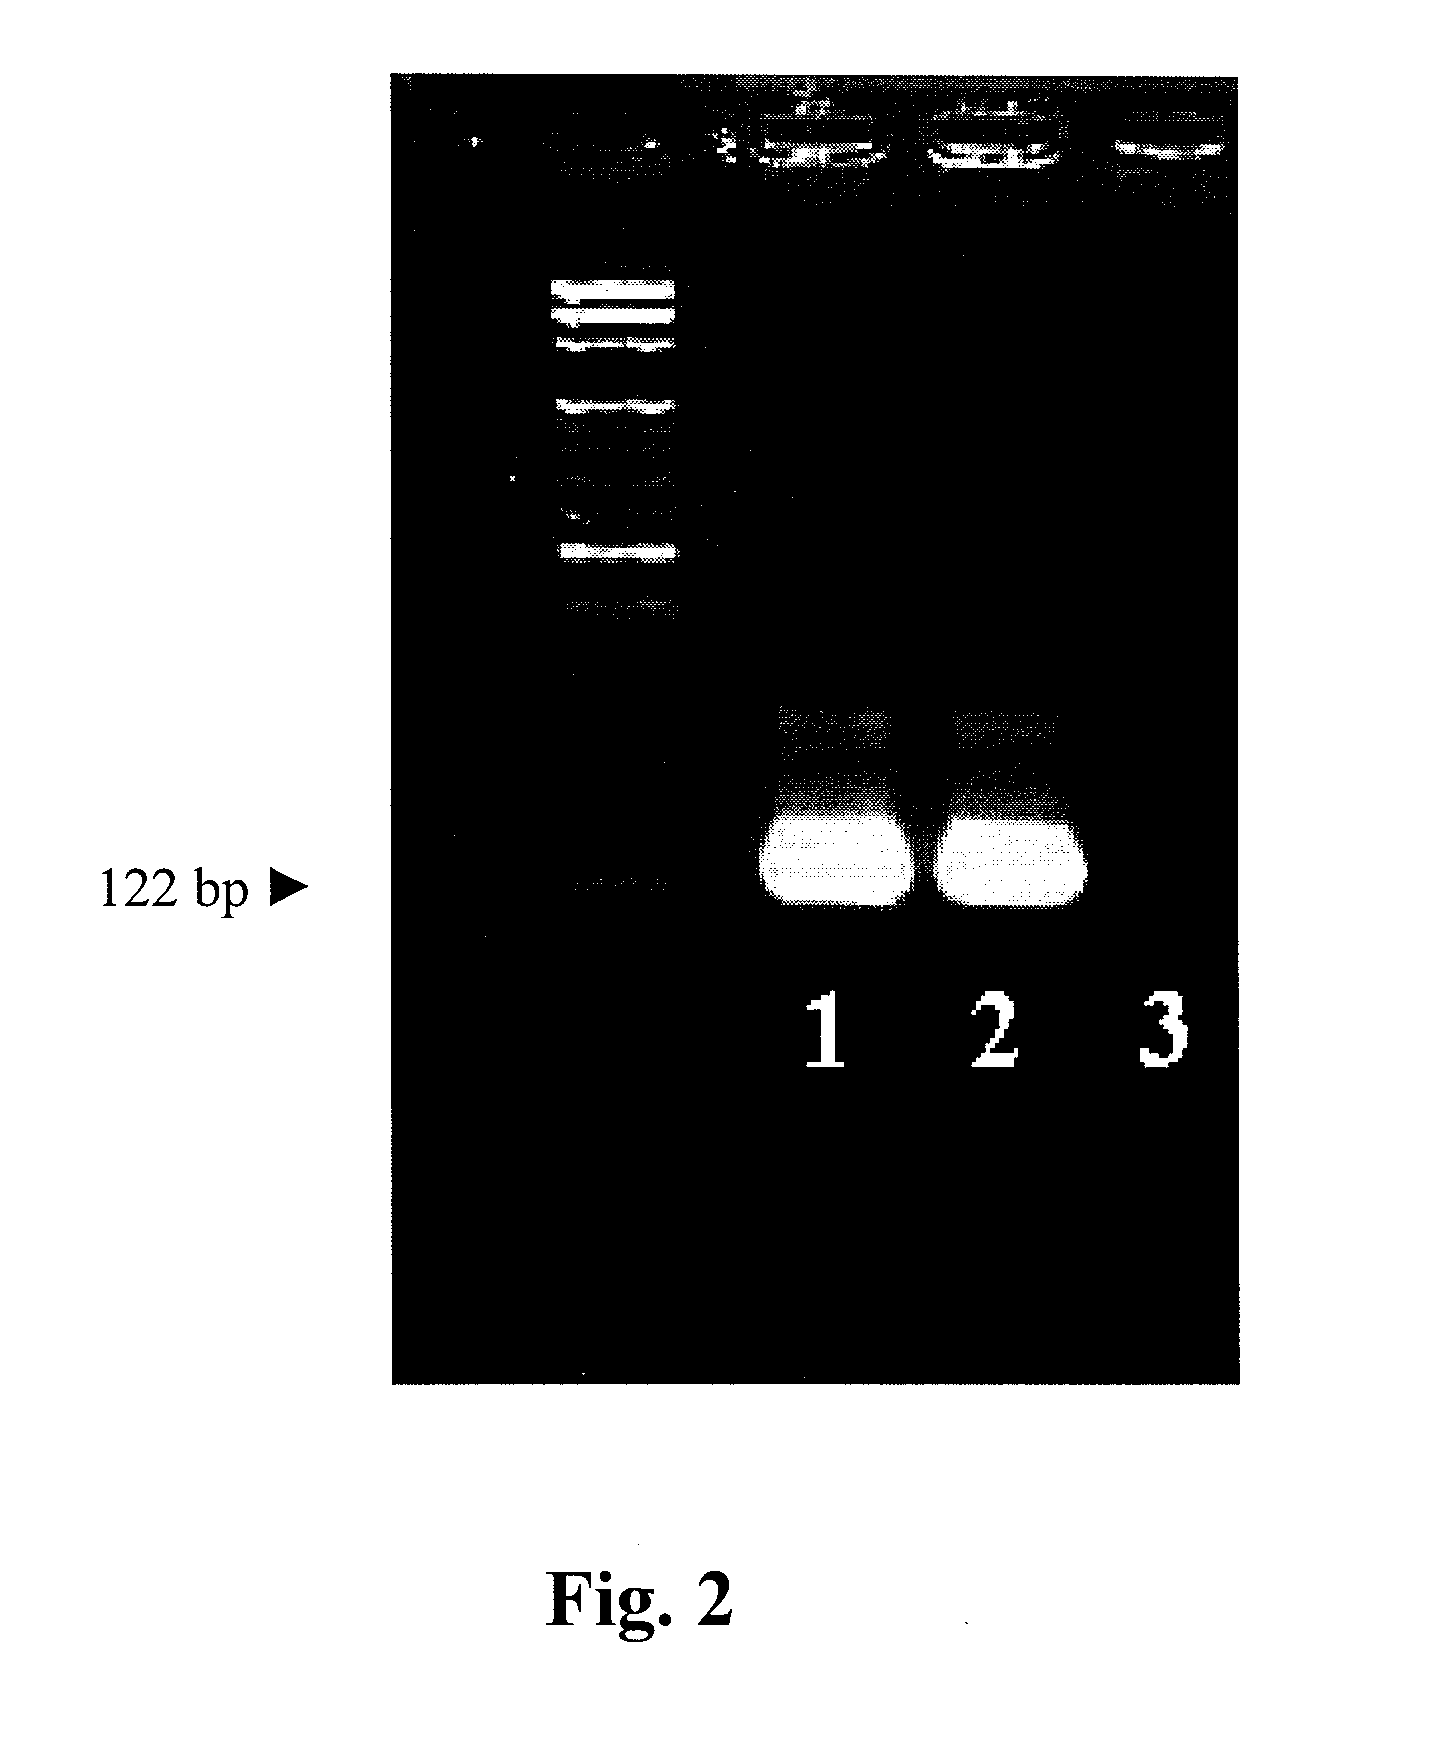 Methods and apparatuses for convective polymerase chain reaction (PCR)